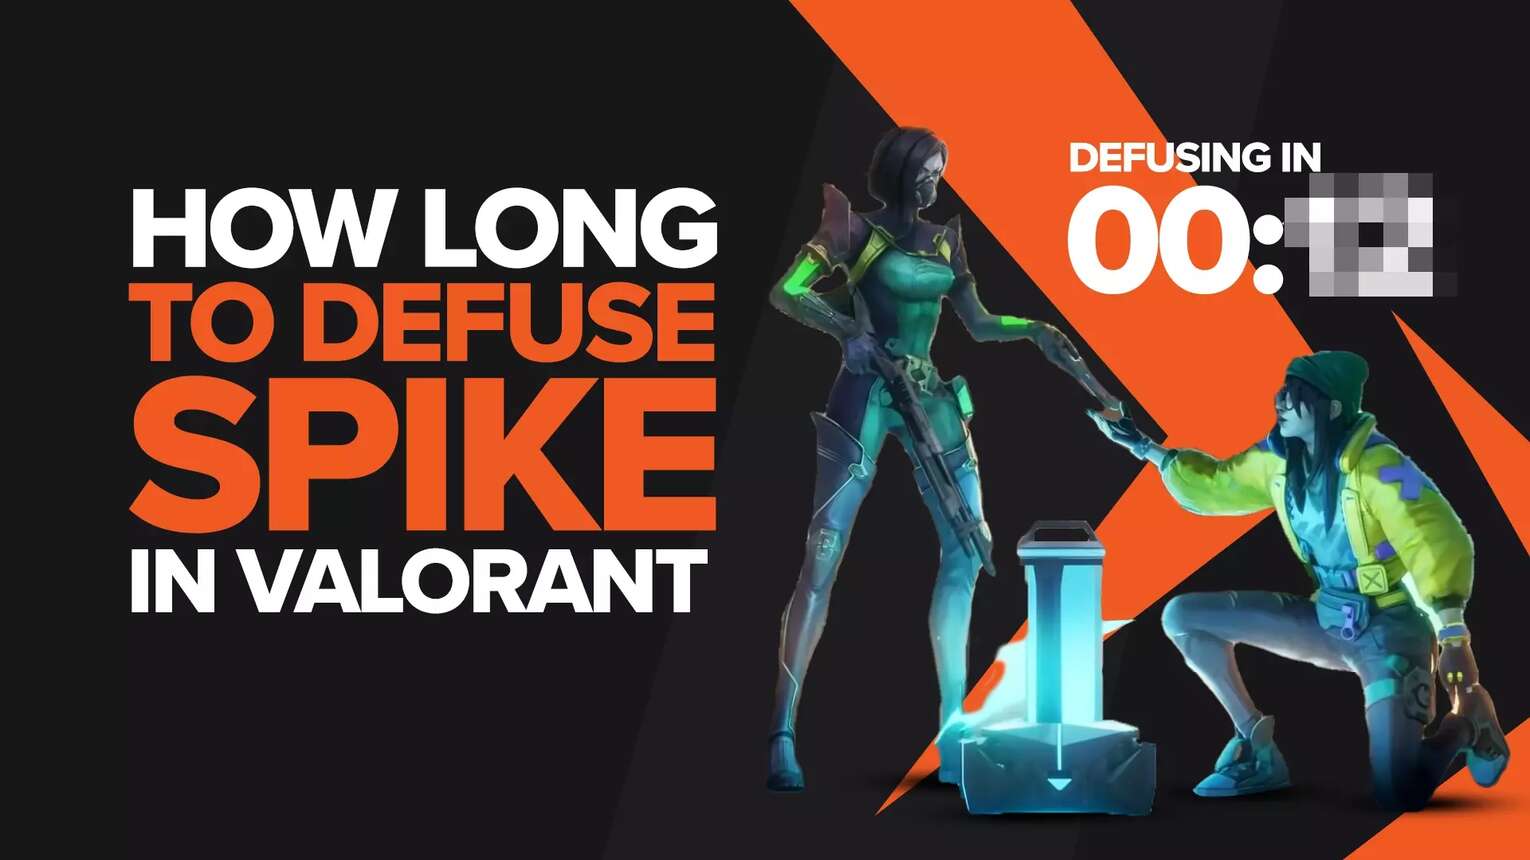 How Long to Defuse The Spike in Valorant? - TRN Checkpoint